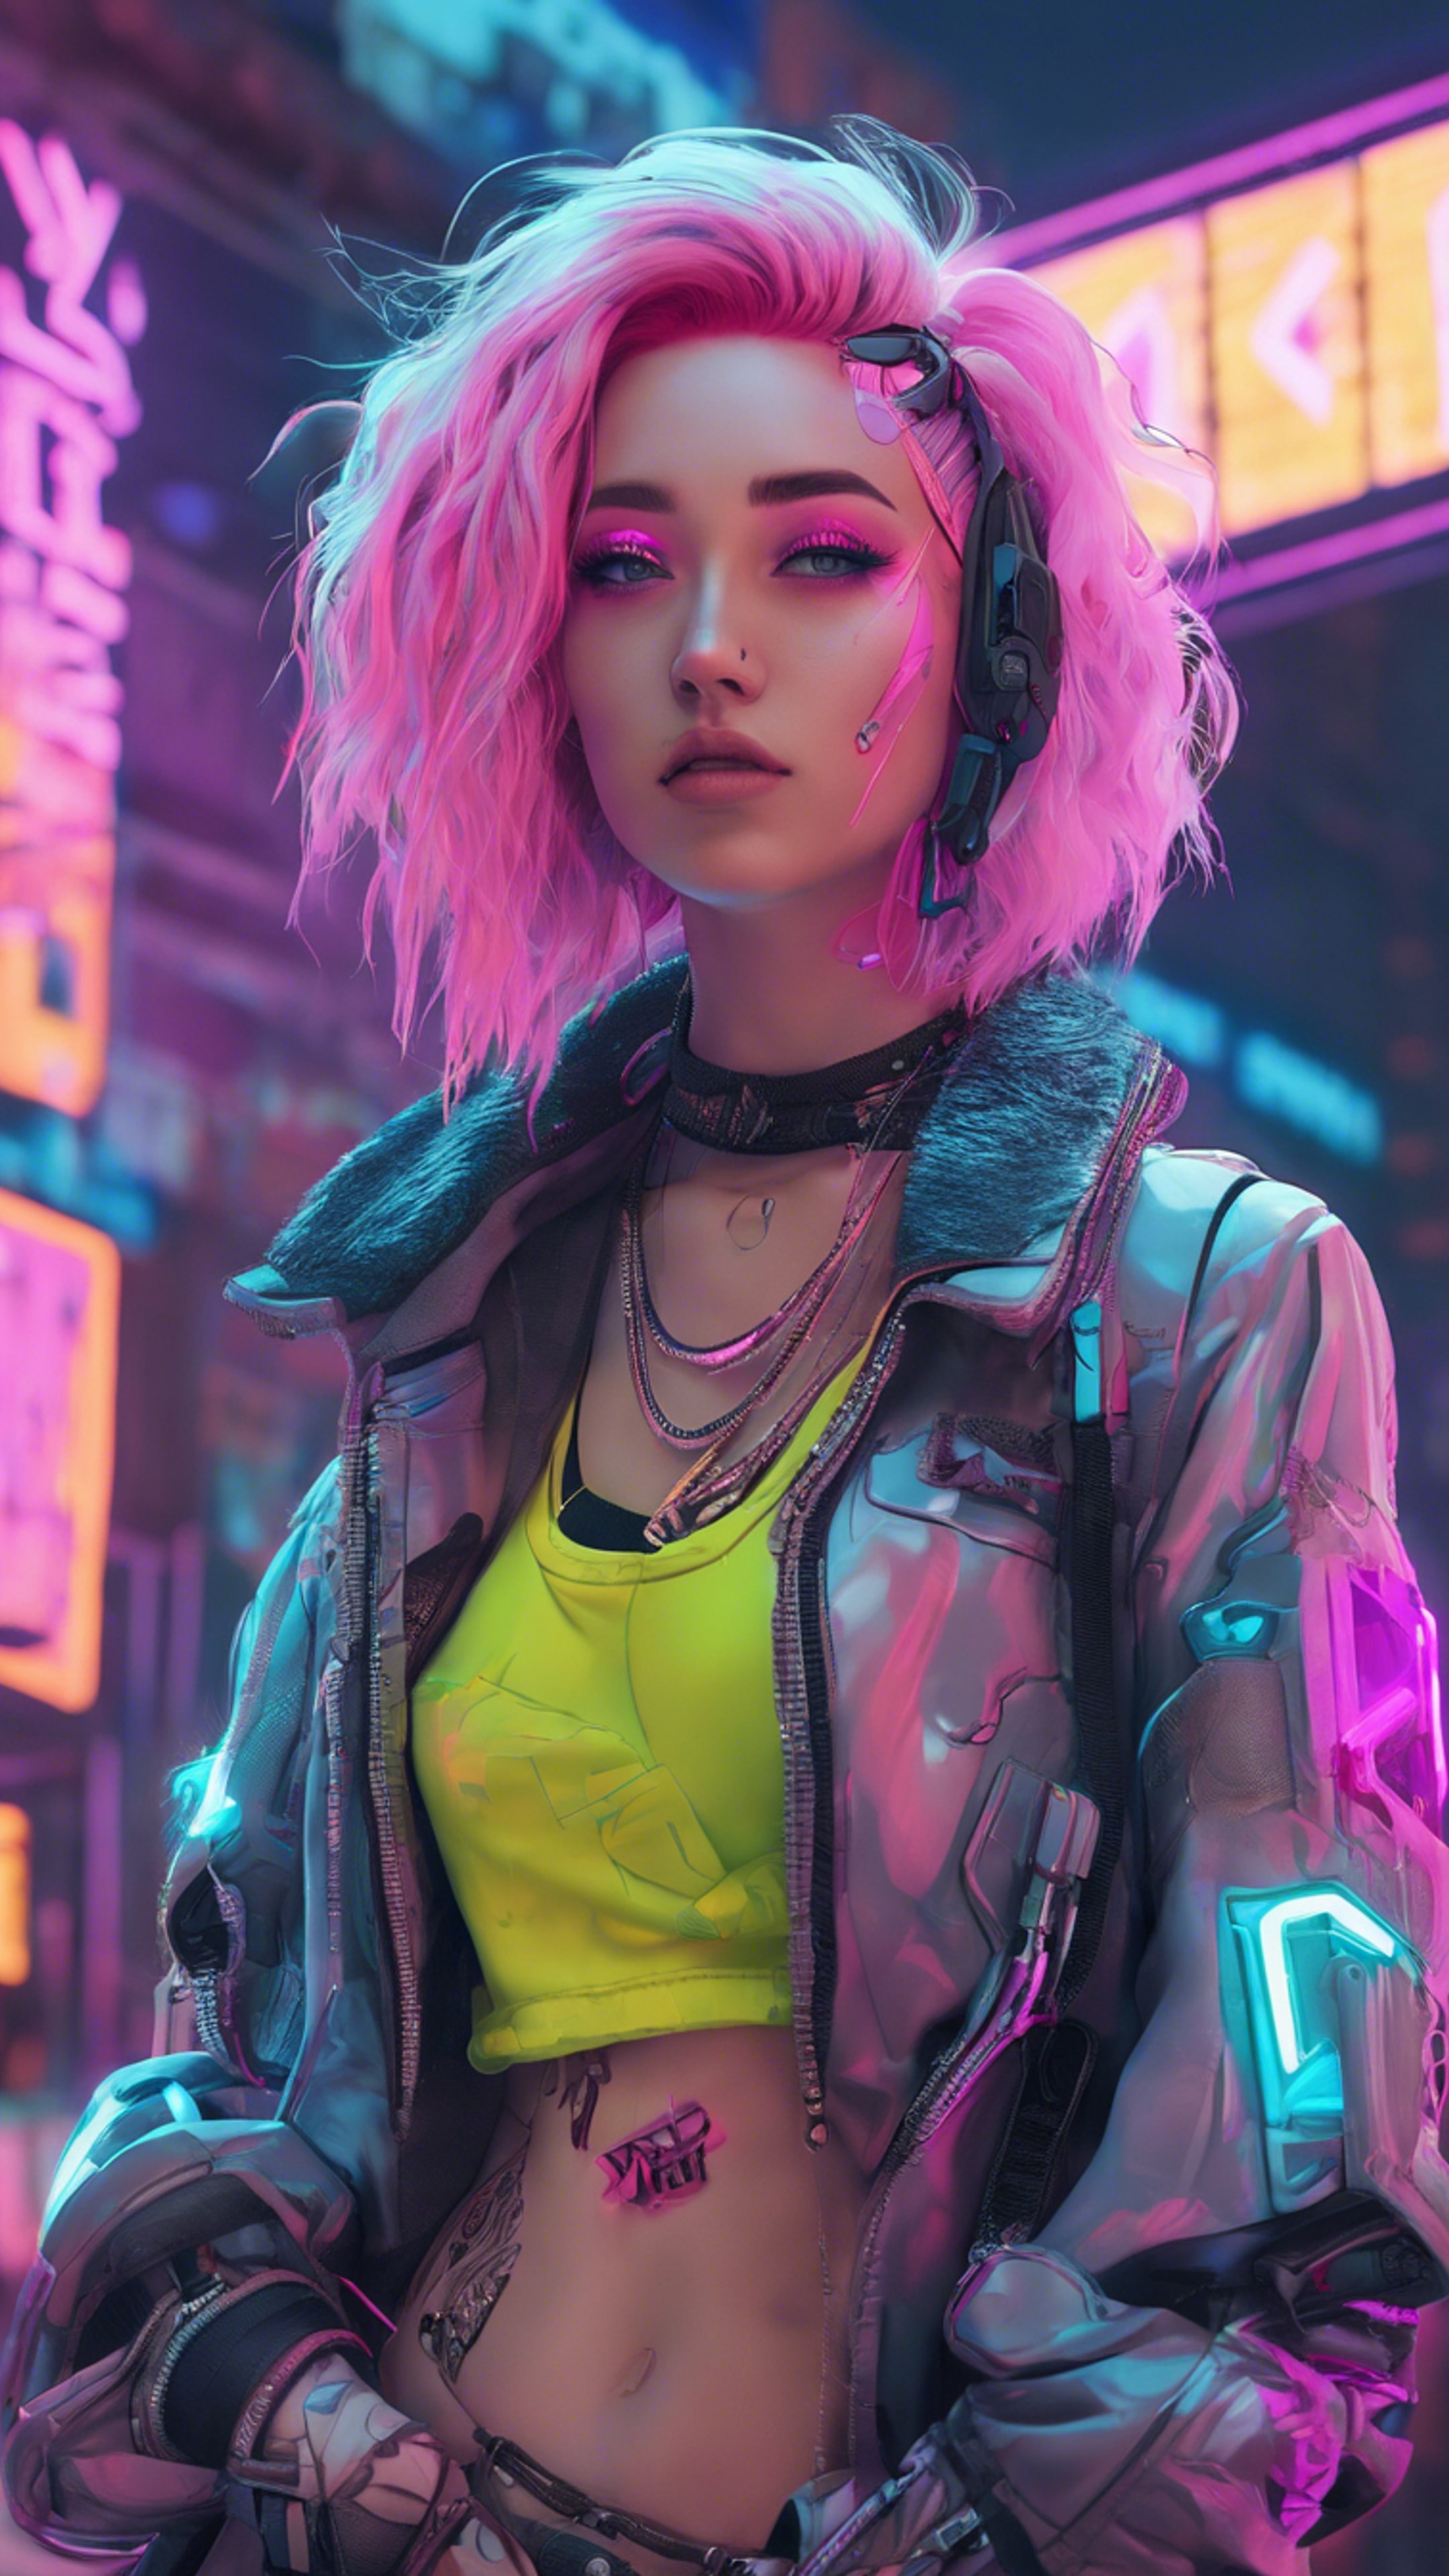 A pastel cyberpunk girl with brightly colored hair, standing in front of a neon sign. 벽지[dbbad63d7b584975aa4e]